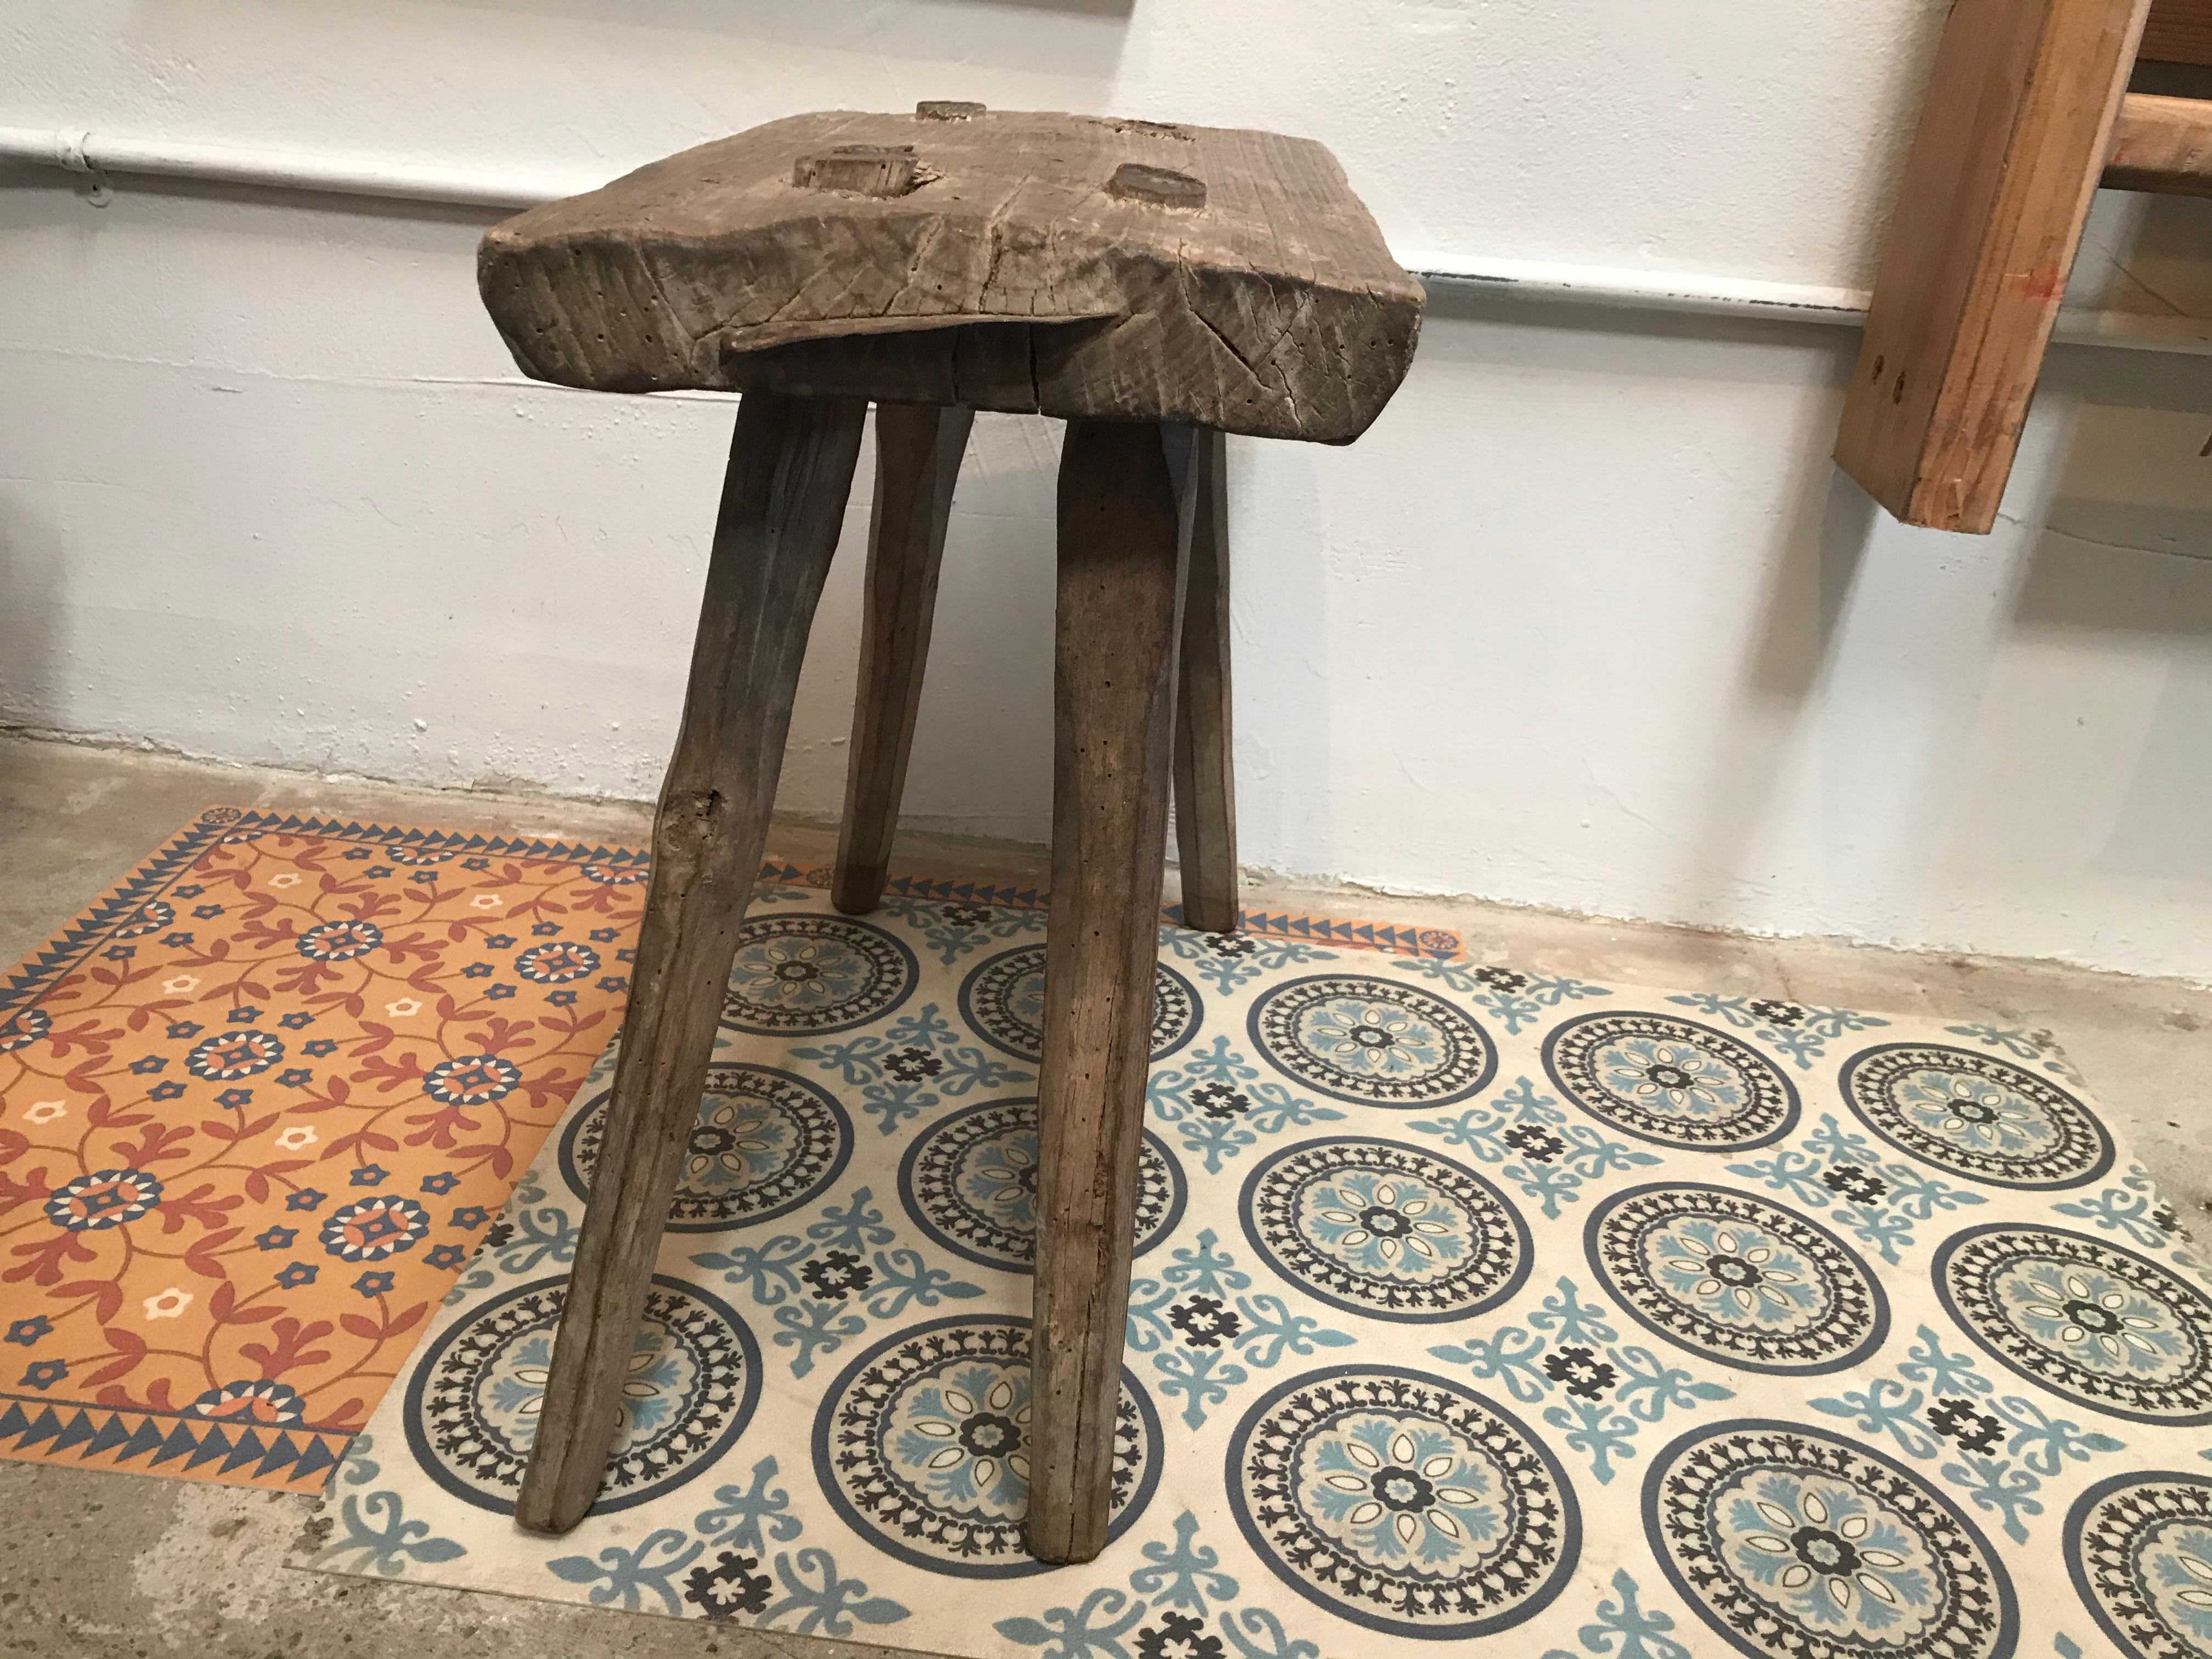 An antique from the French countryside, this vintage milking stool has aged beautifully.